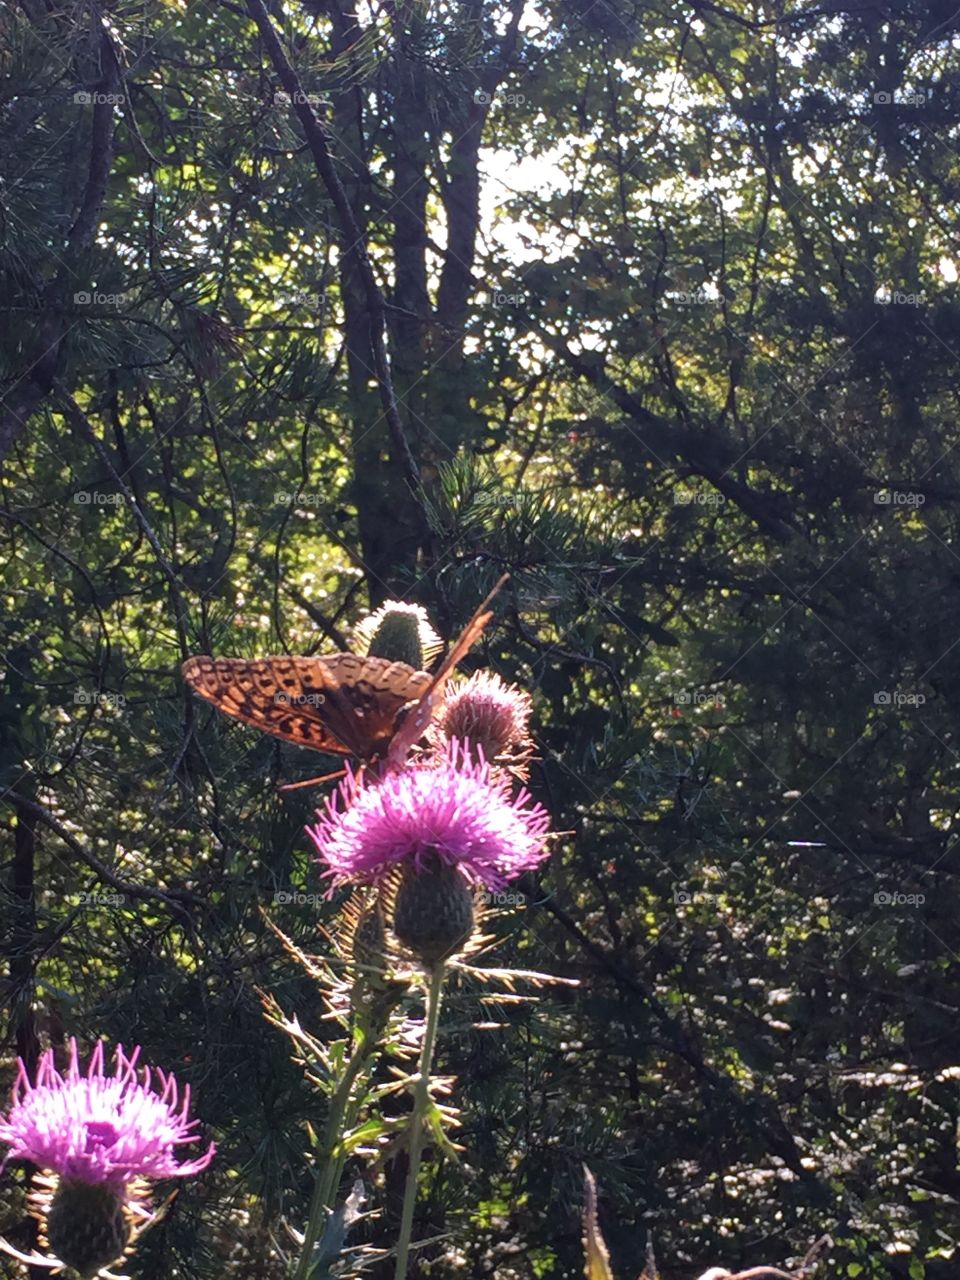 Butterfly on thistle 